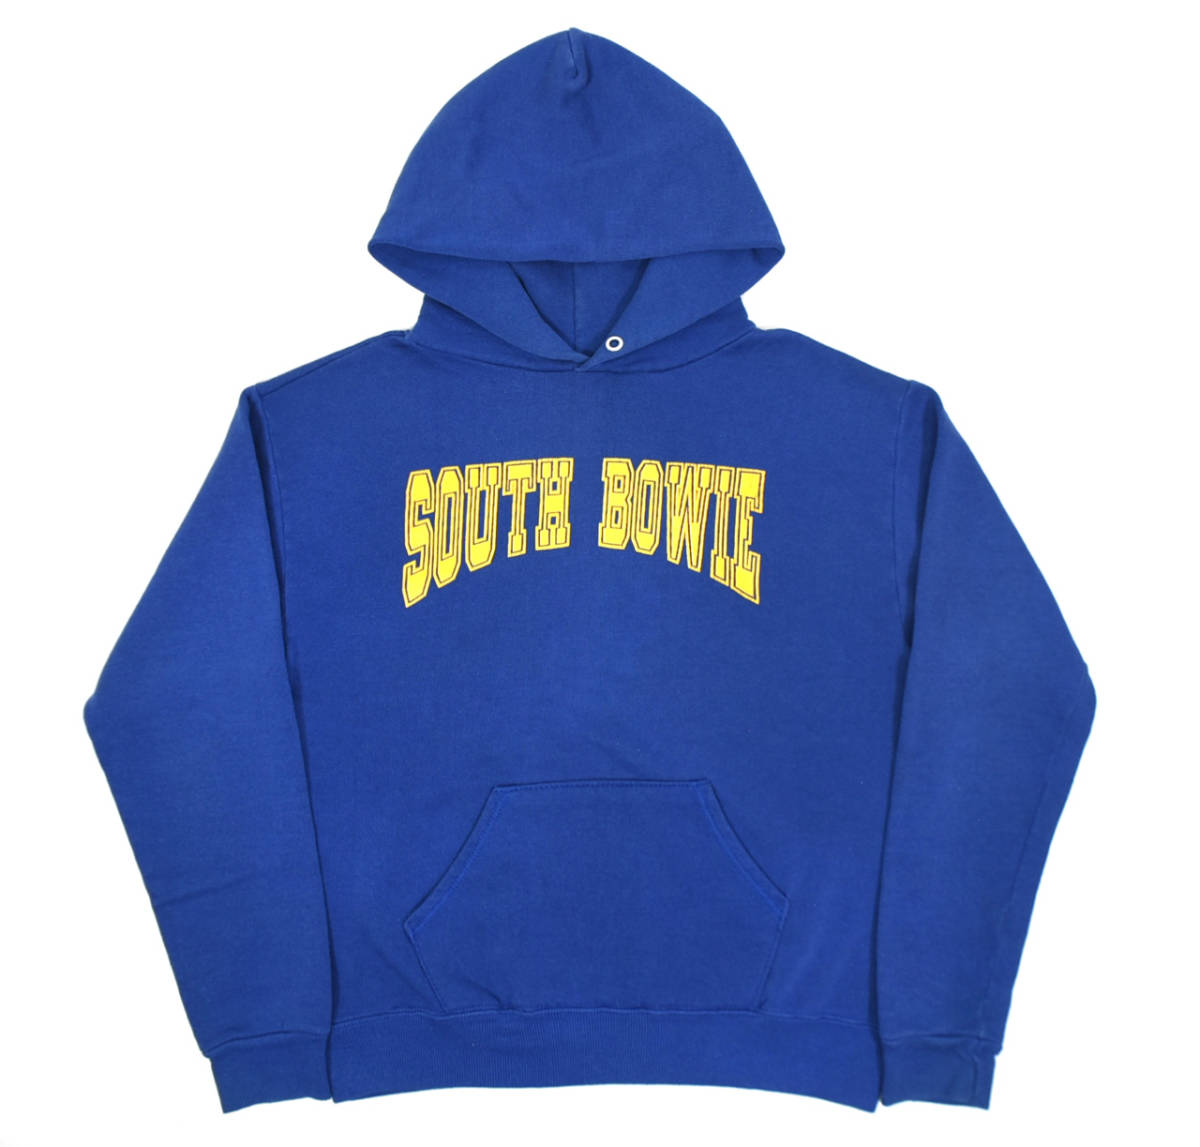 USA製 1980s SOUTH BOWIE Sweat hoodie L Blue ヴィンテージ スウェットフーディー パーカ ブルー×イエロー_画像1